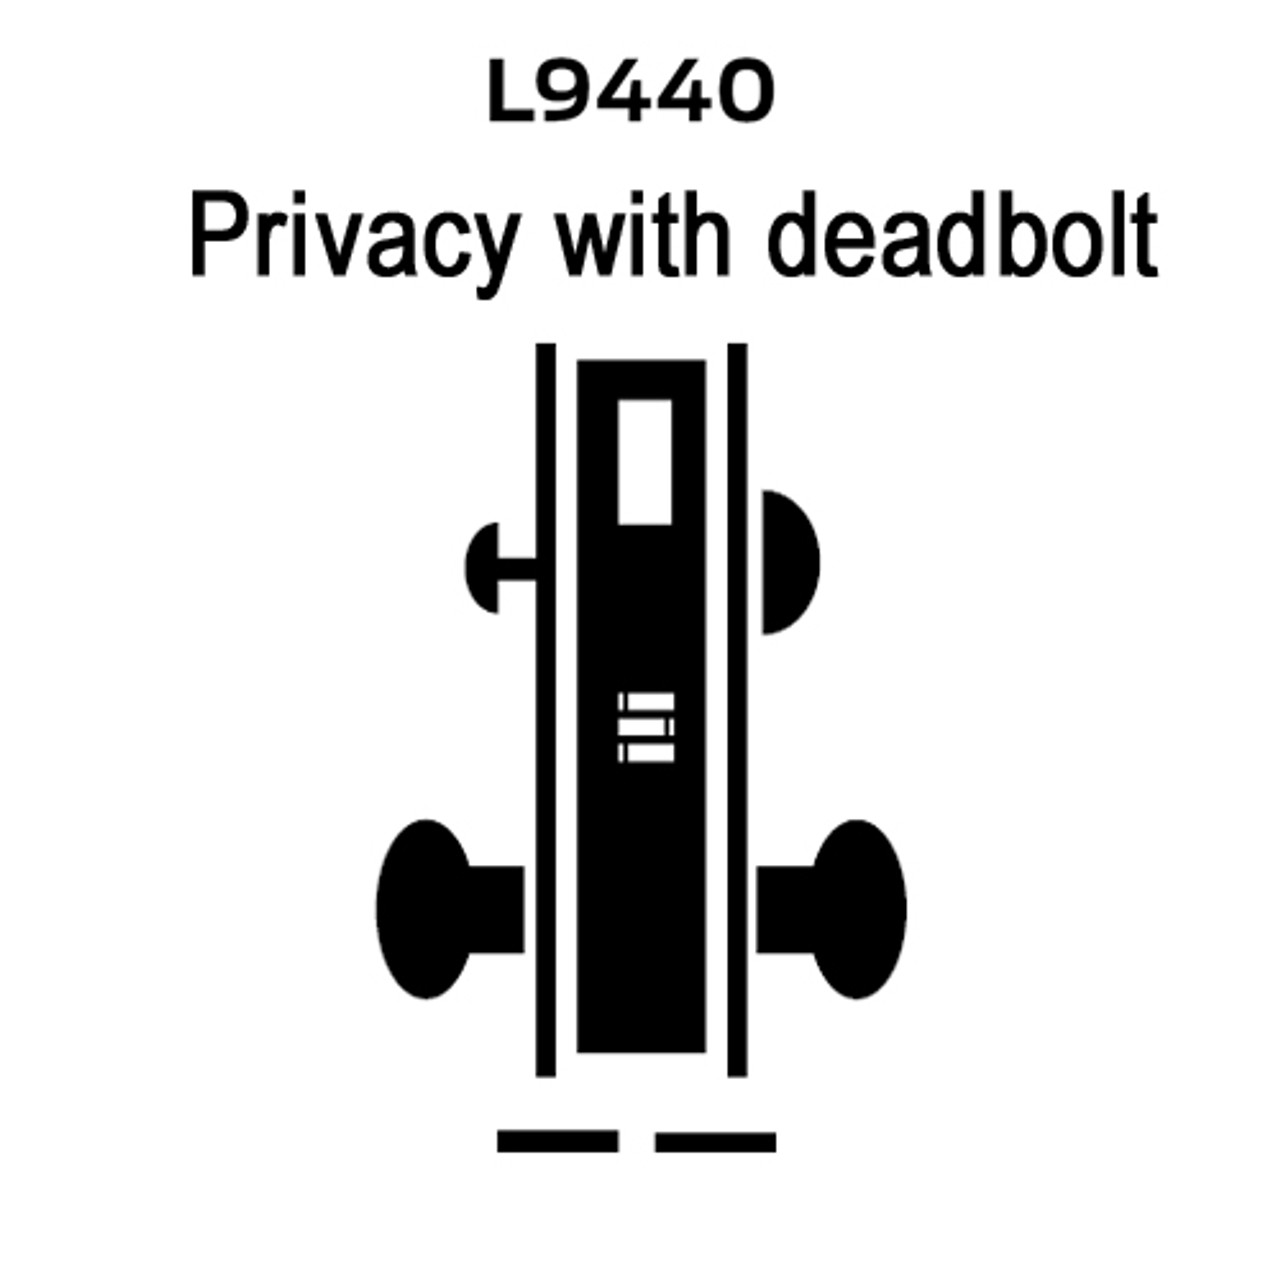 L9440-12B-625-LH Schlage L Series Privacy with Deadbolt Commercial Mortise Lock with 12 Cast Lever Design in Bright Chrome